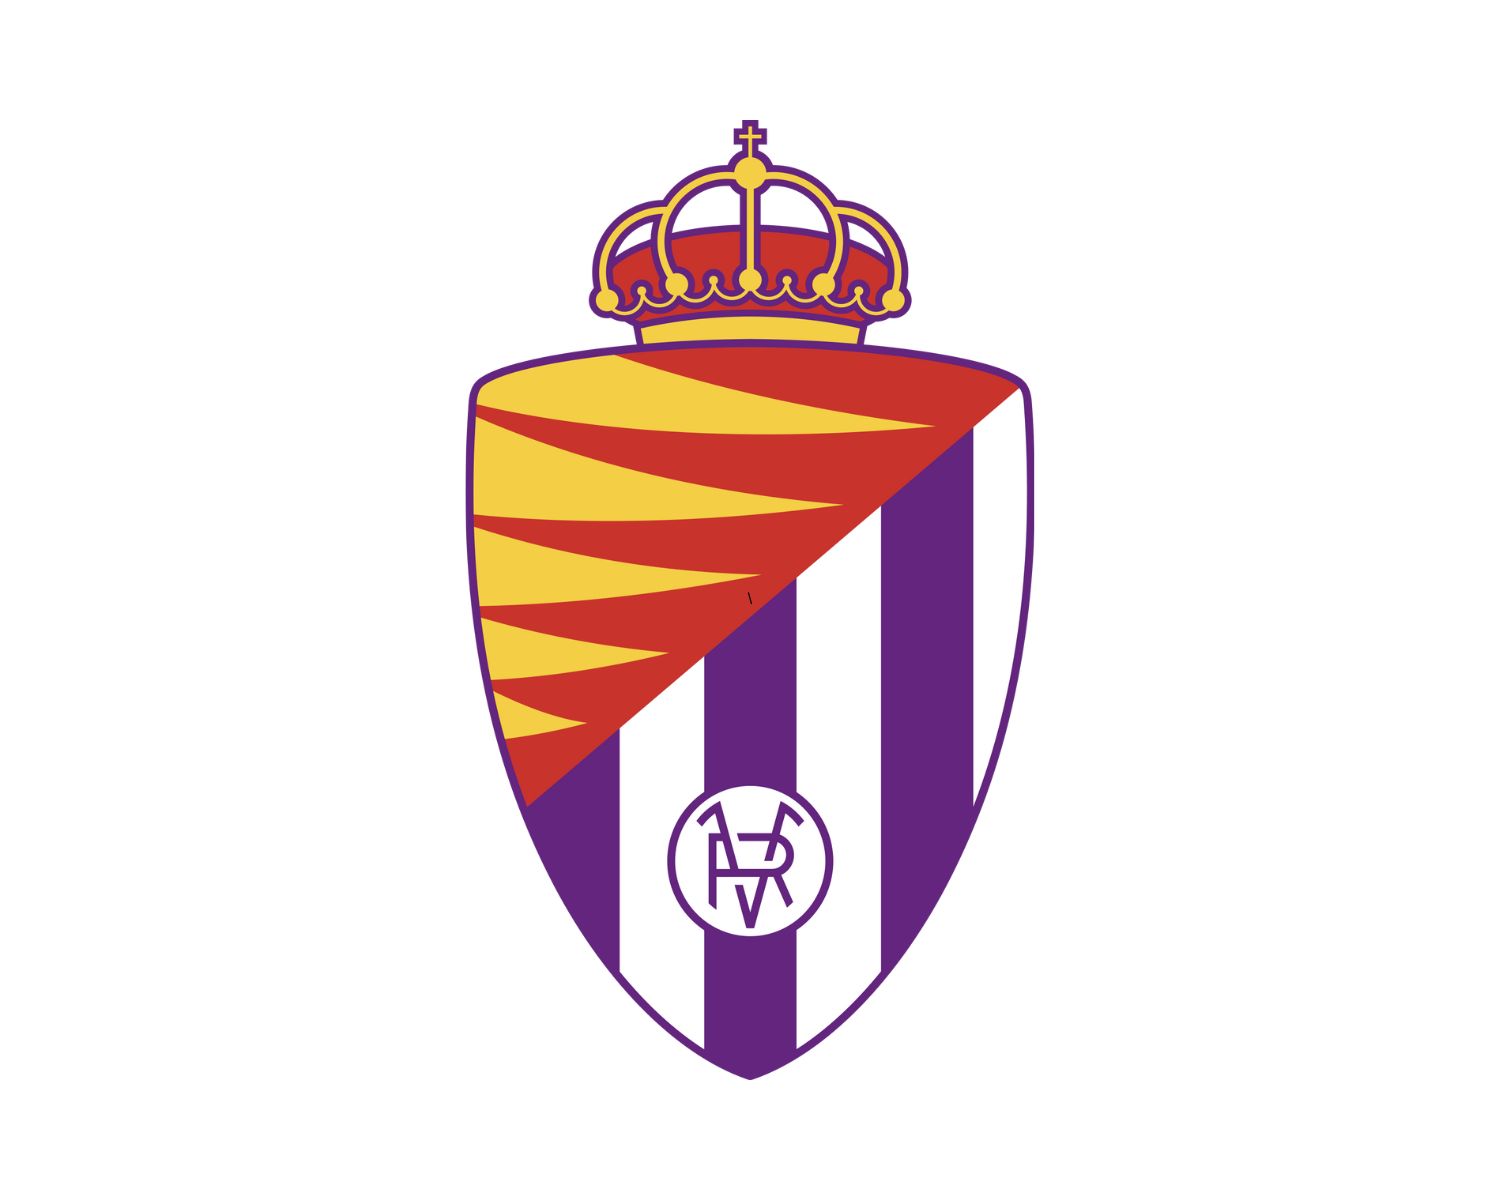 Real Valladolid: 13 Football Club Facts - Facts.net